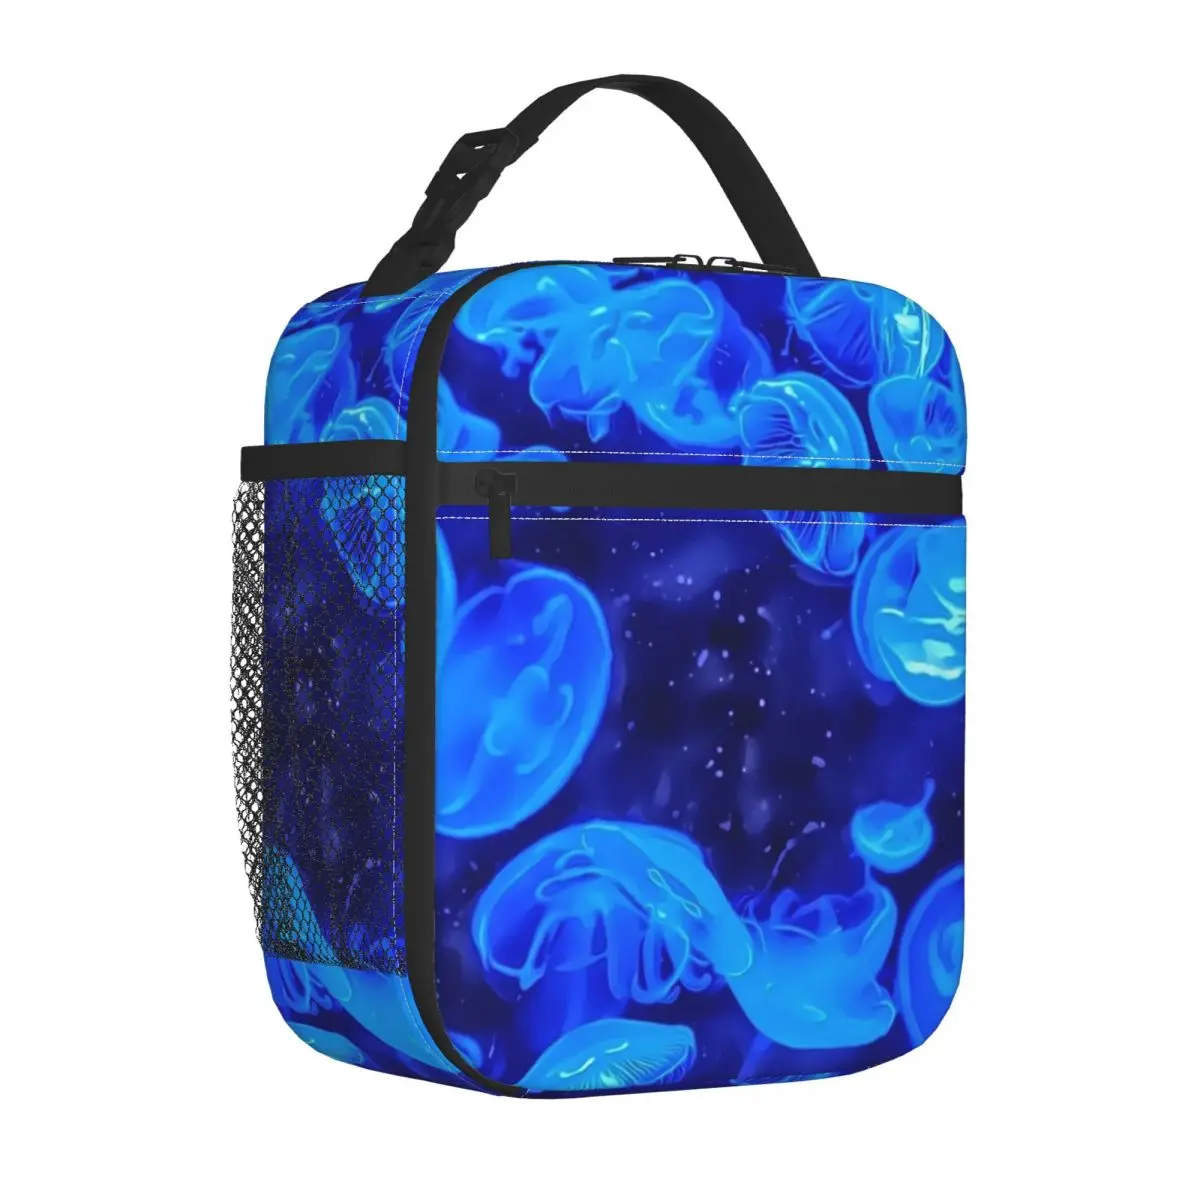 

Tropical Marine Print Lunch Bag For Unisex Blue Jelly Fish Lunch Box Fun Picnic Cooler Bag Portable Oxford Thermal Tote Handbags